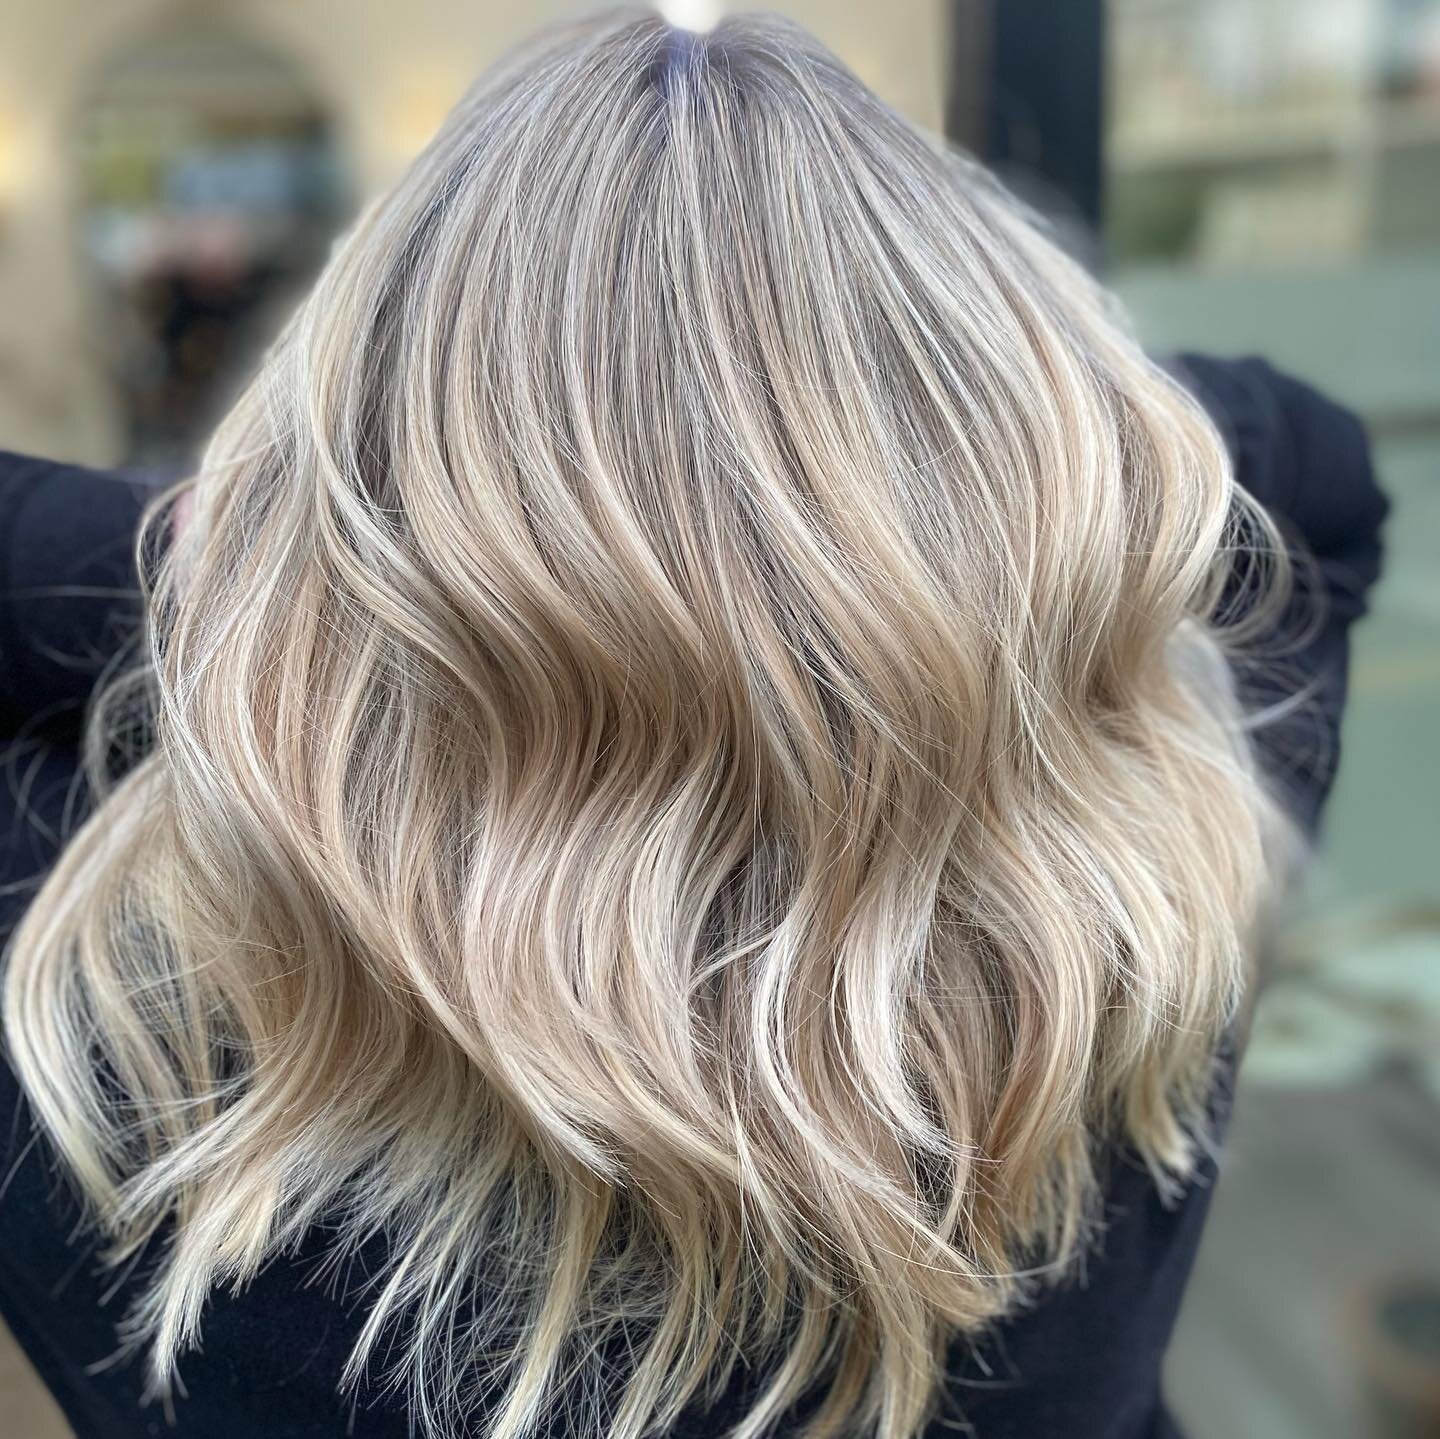 Just caught the last of the good enough daylight for this 🙌🏻 

Lots of depth left in there but still super blonde. Using as much natural as possible and covering some grey/white (in between foils) at the front to even up with the back. Toner/gloss 